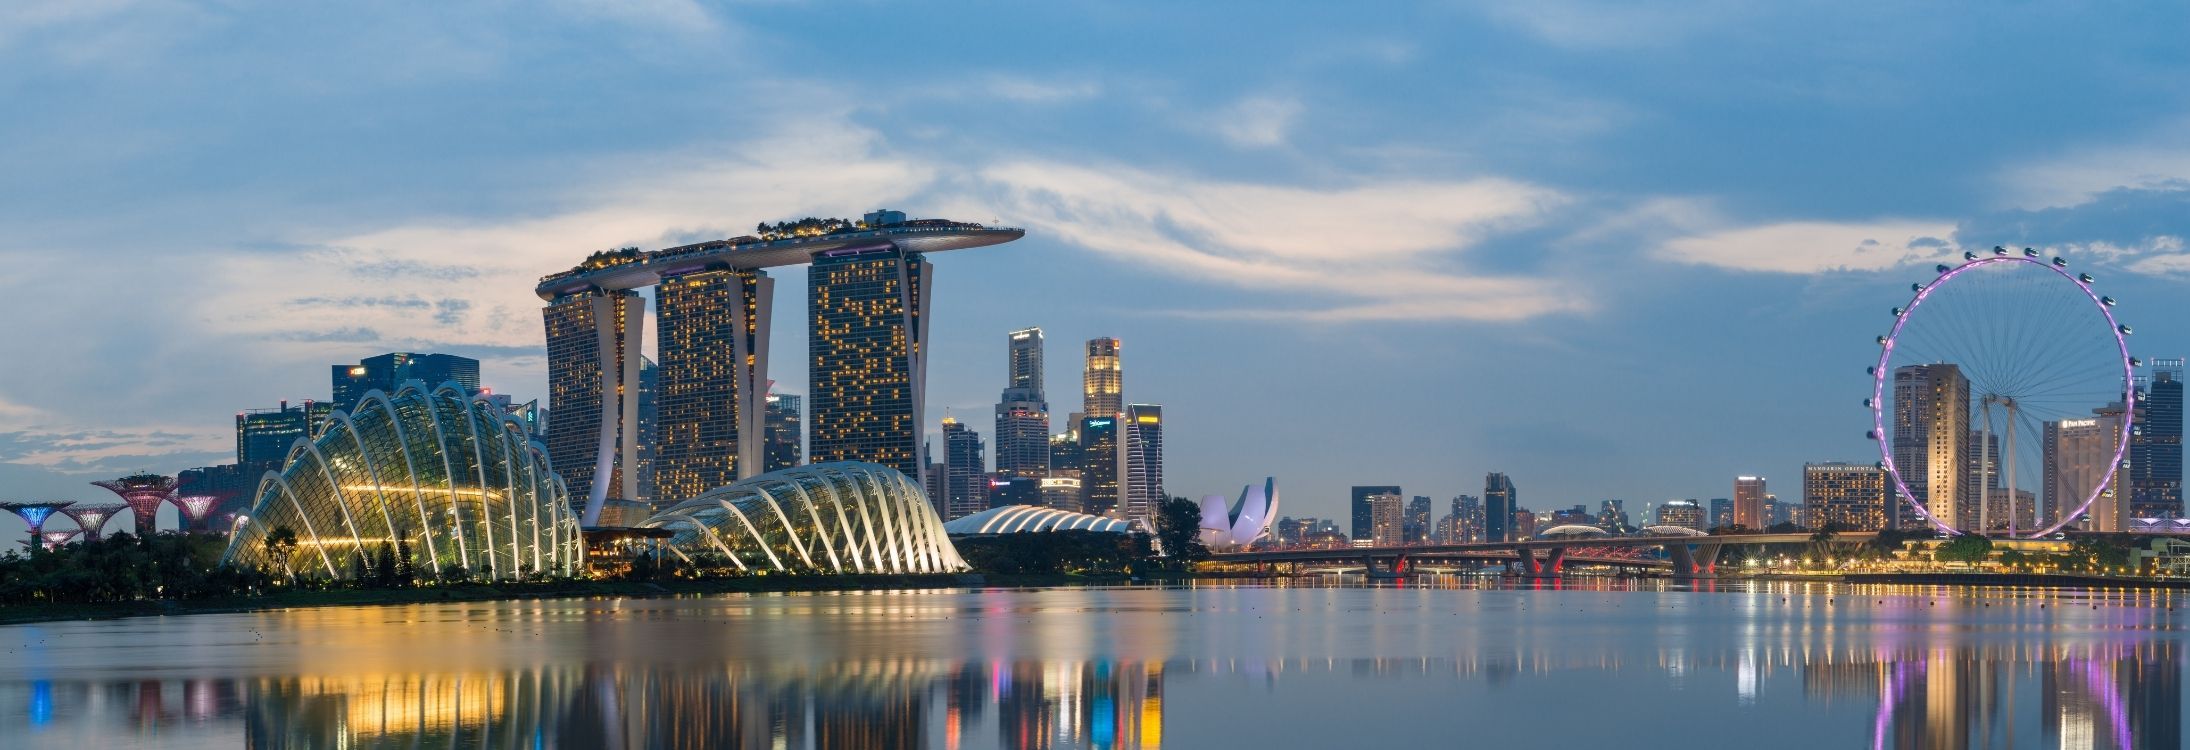 20 Lesser Known Facts About Singapore